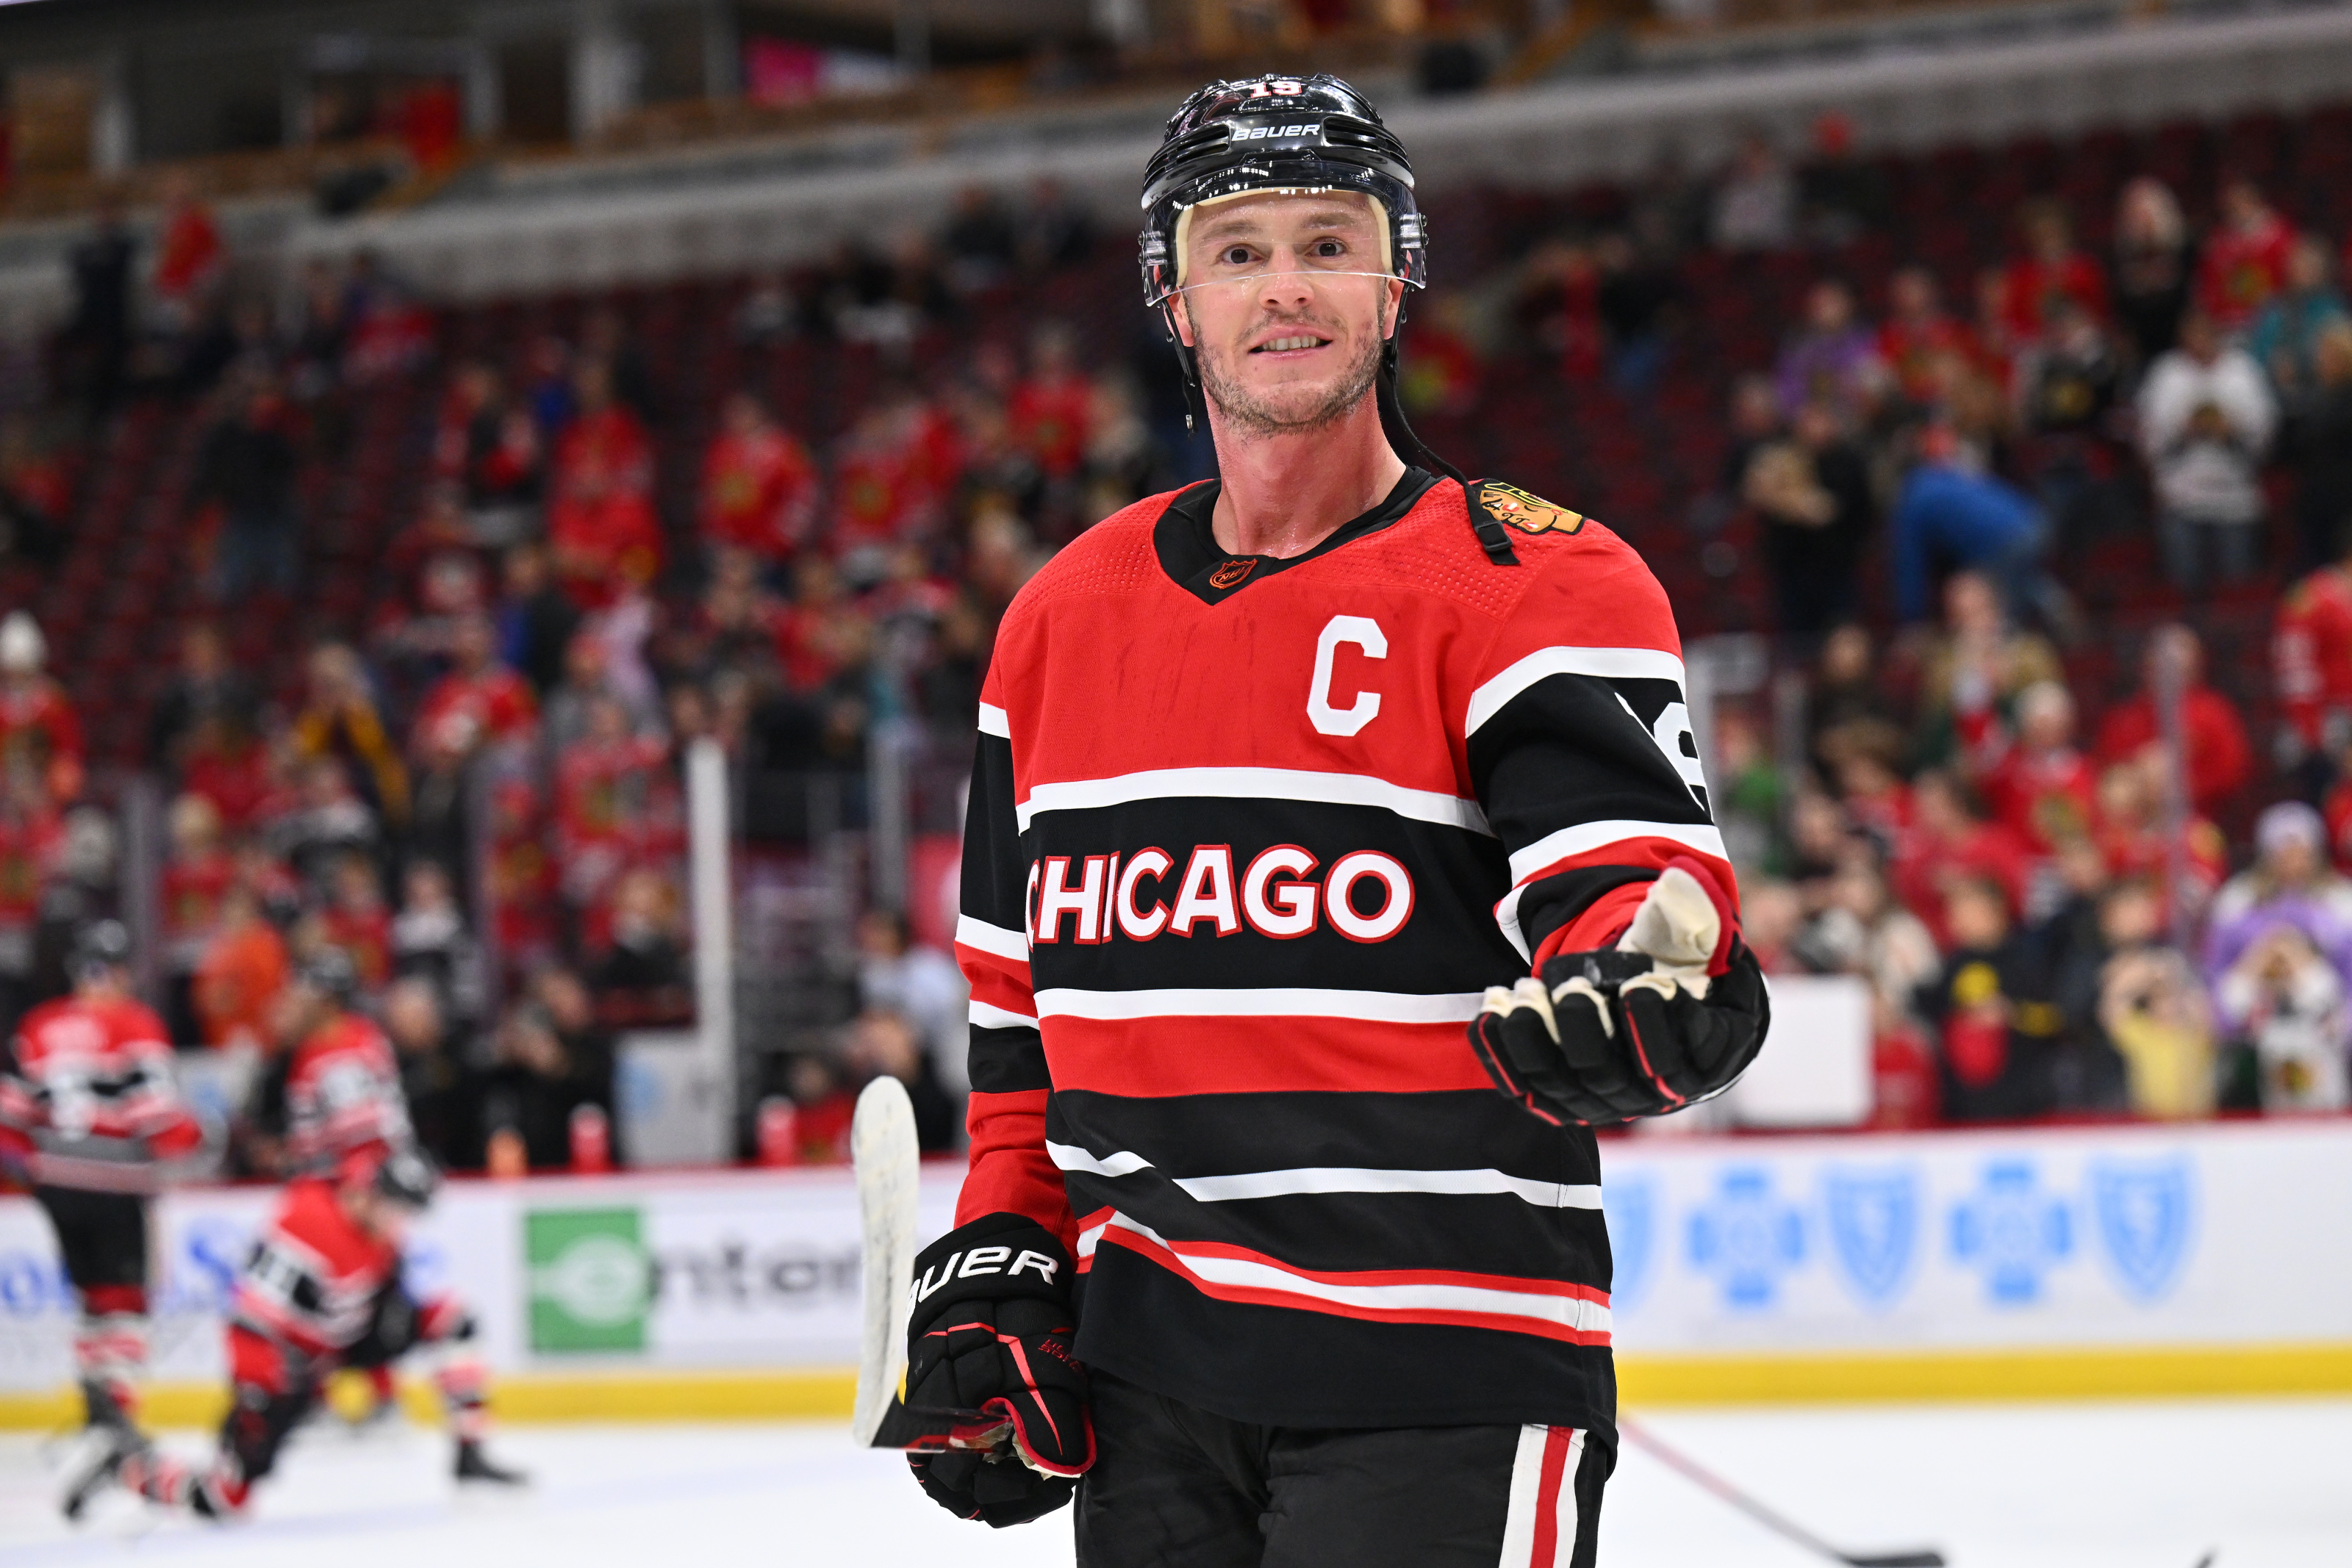 Think he's done: NHL fans speculate Jonathan Toews' retirement